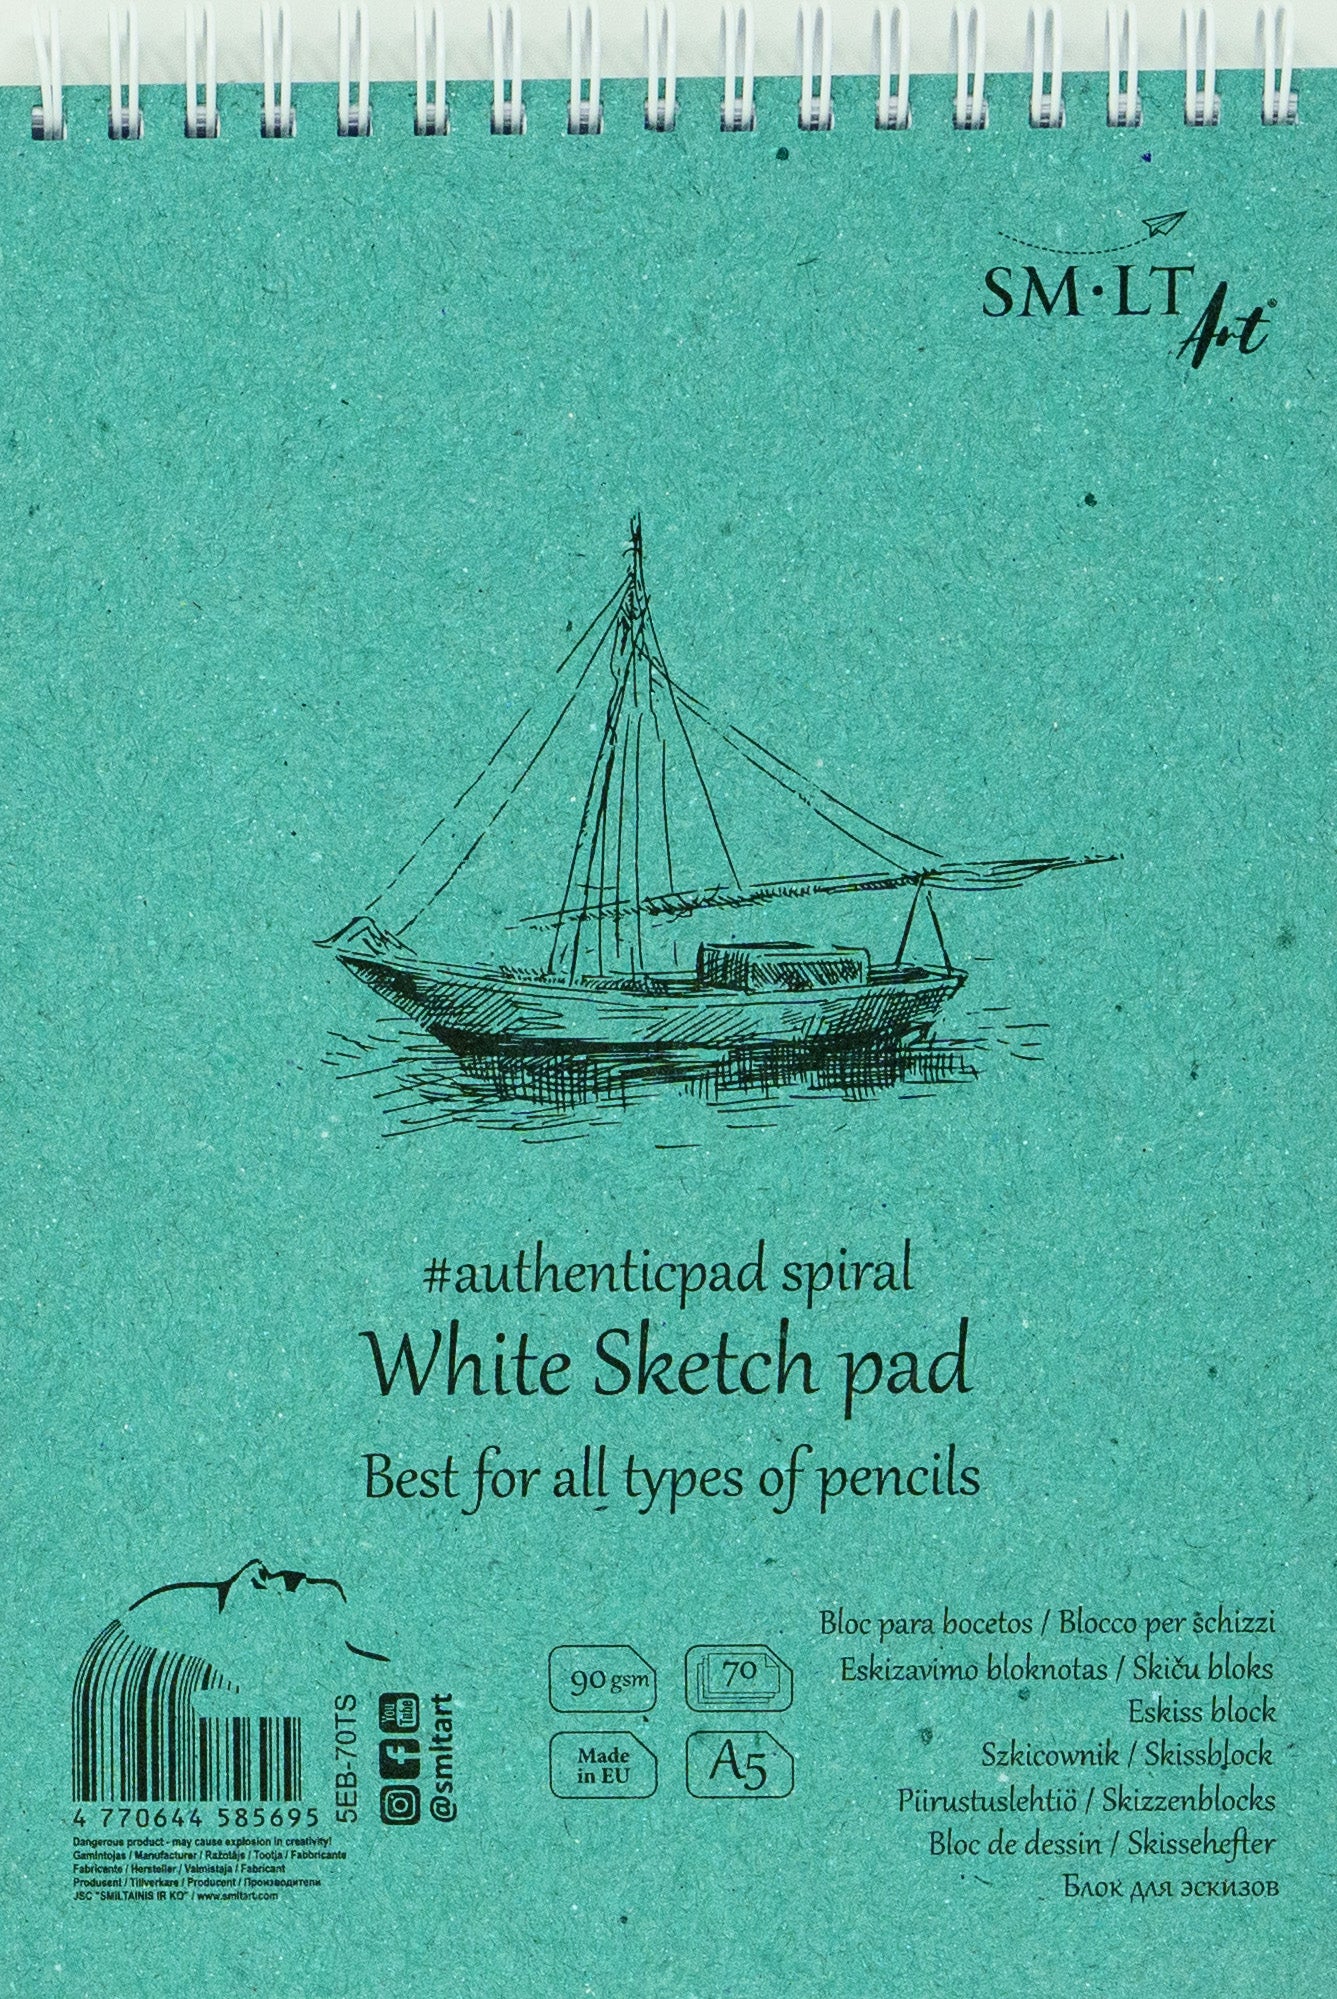 SM-LT Sketch pads Authentic White